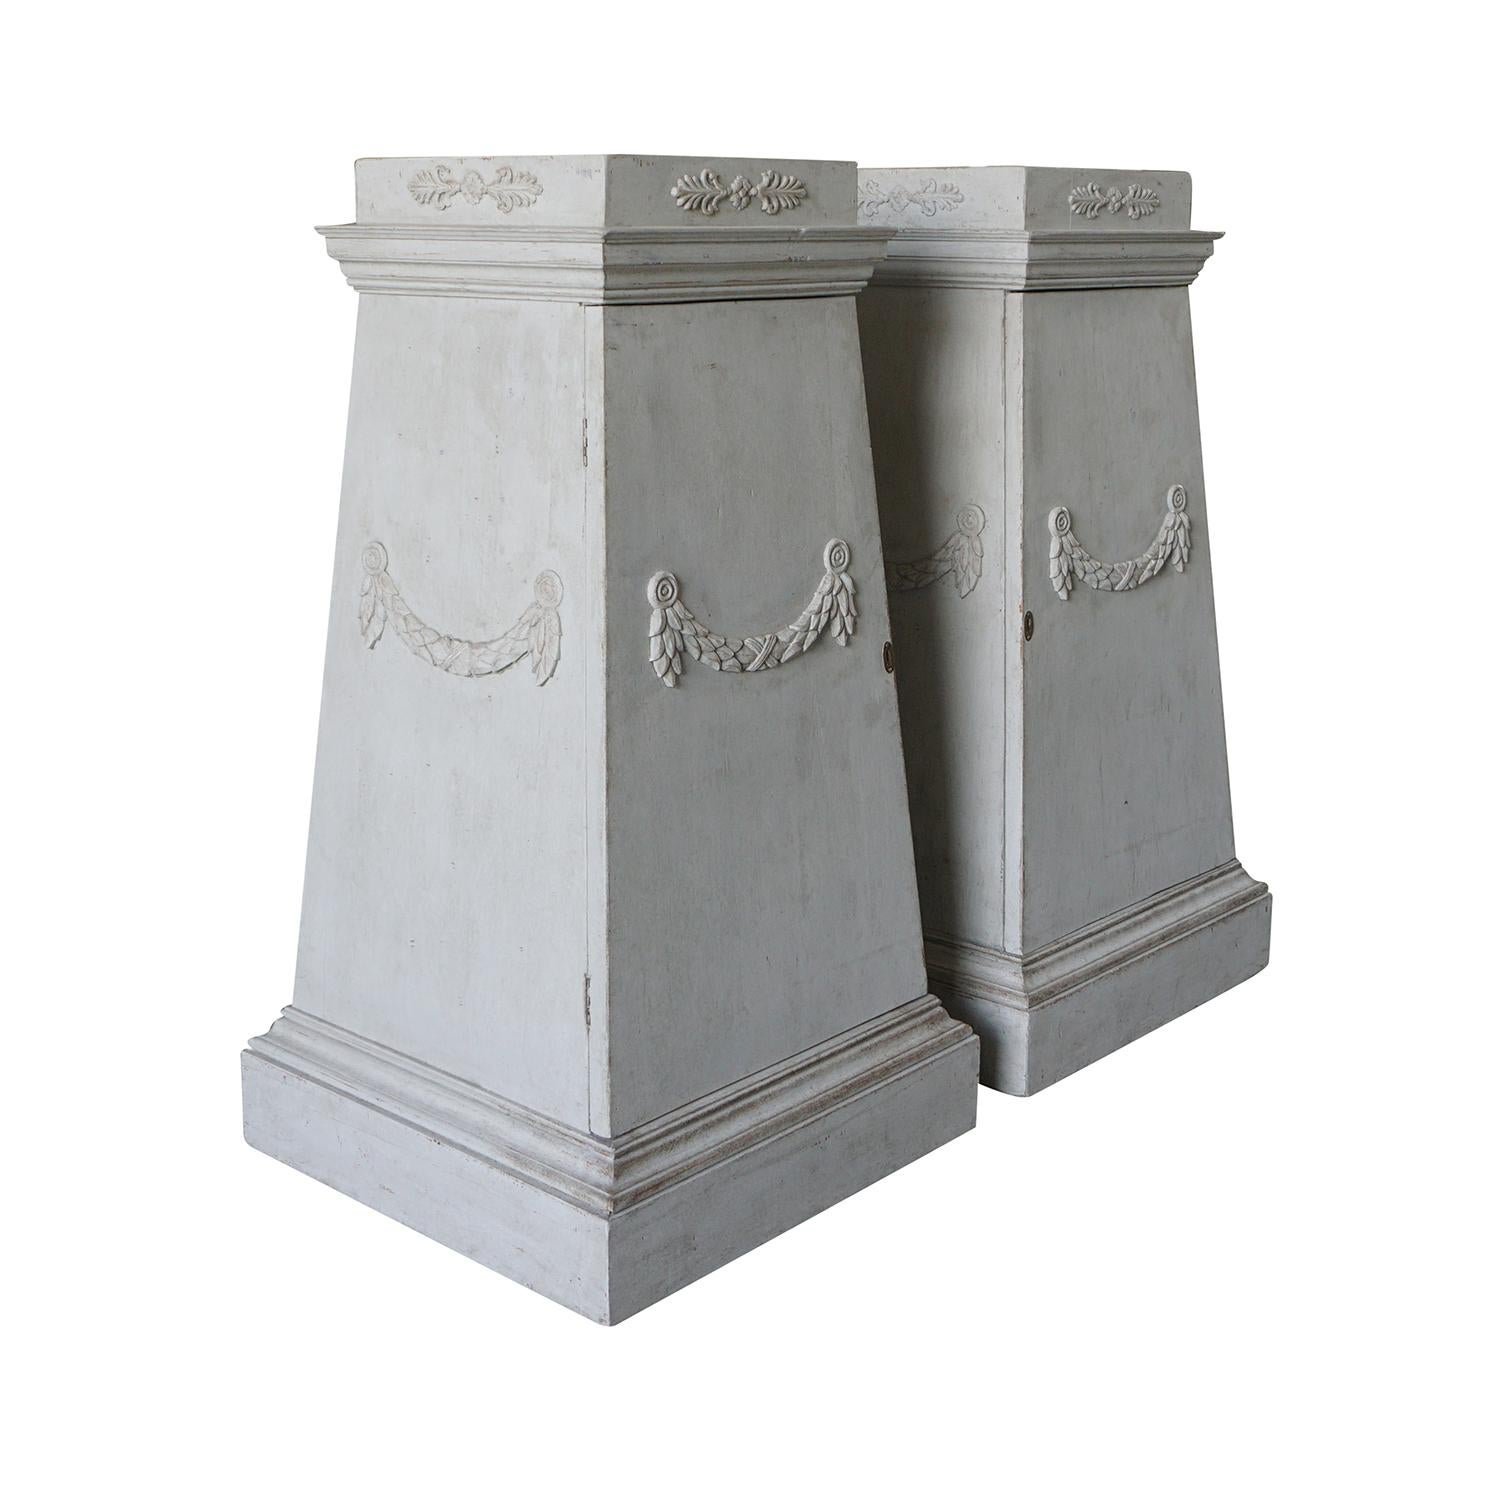 A white-grey, antique pair of Swedish Gustavian pedestals, cabinets made of light-grey painted Pinewood with carved garlands. The hand carved Scandinavian commodes are in good condition, detailed in the Neoclassical Greek style with their original